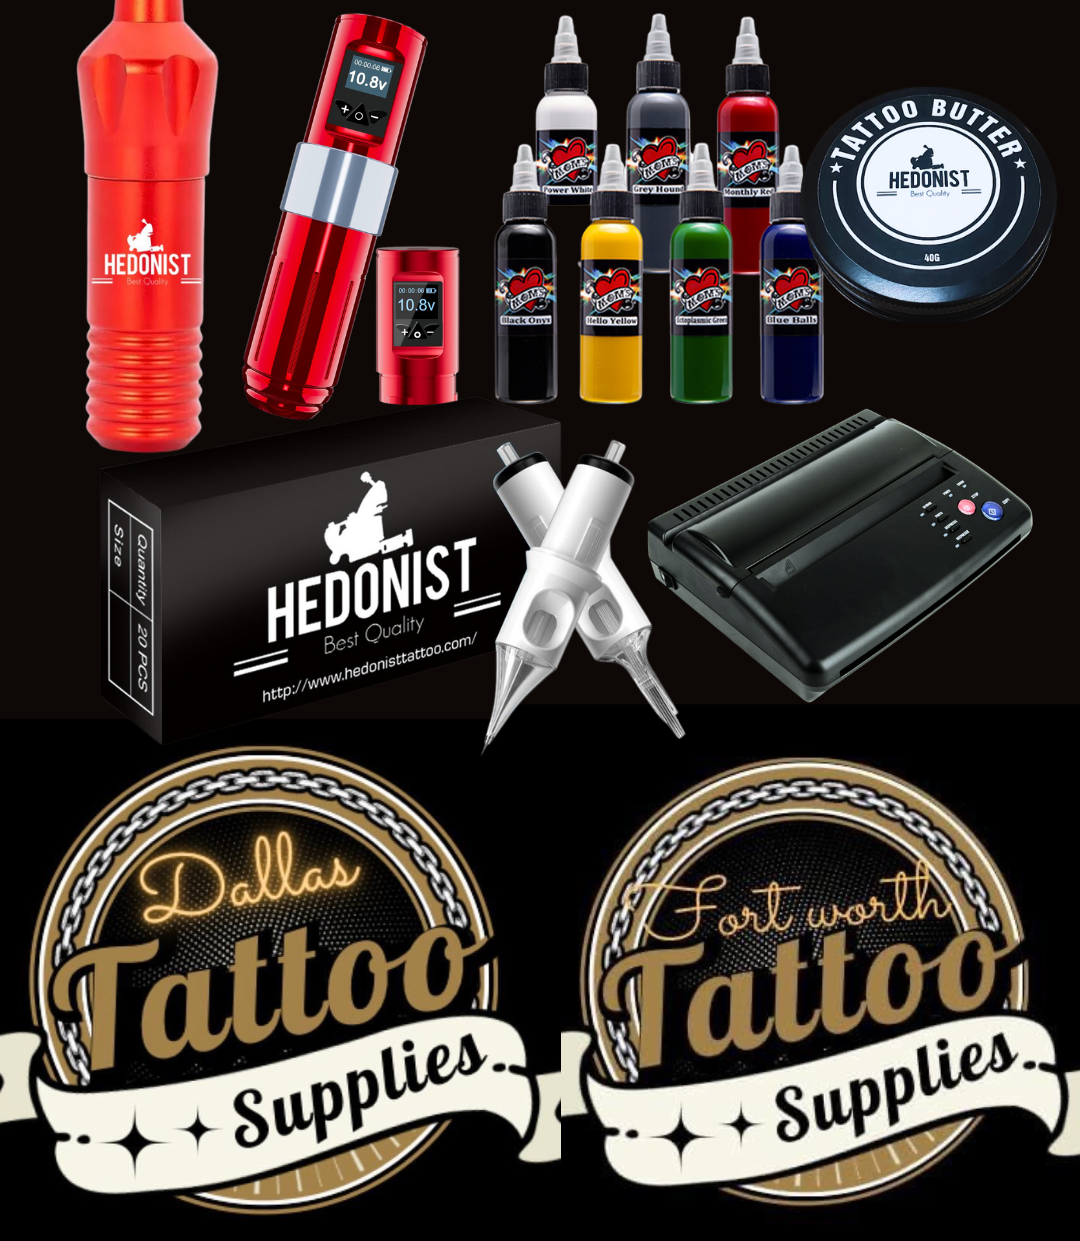 Welcome to Dallas Tattoo Supplies